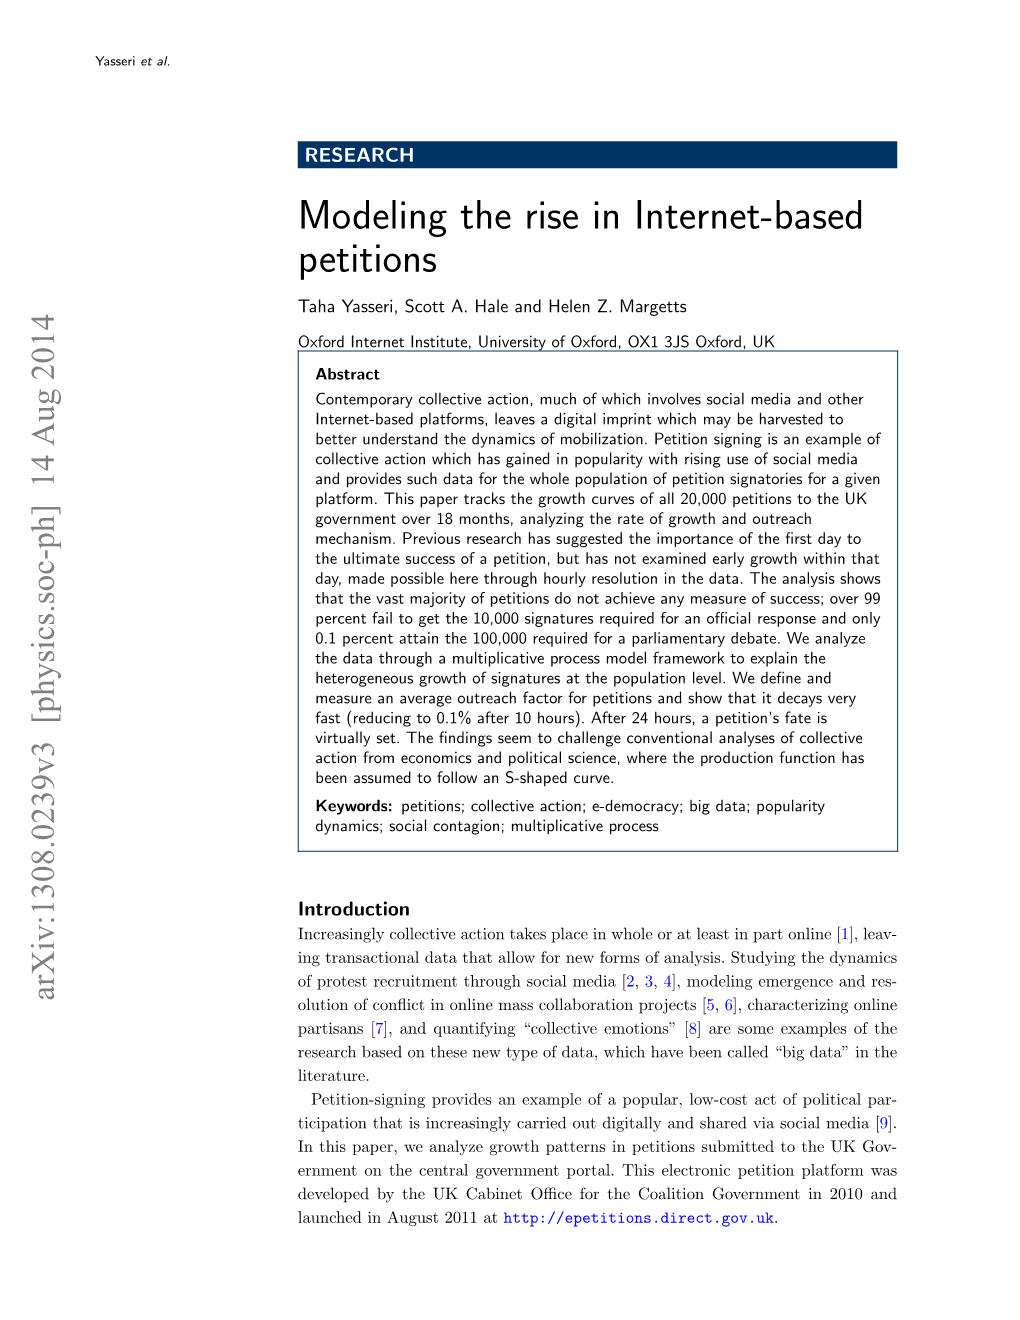 Modeling the Rise in Internet-Based Petitions Taha Yasseri, Scott A